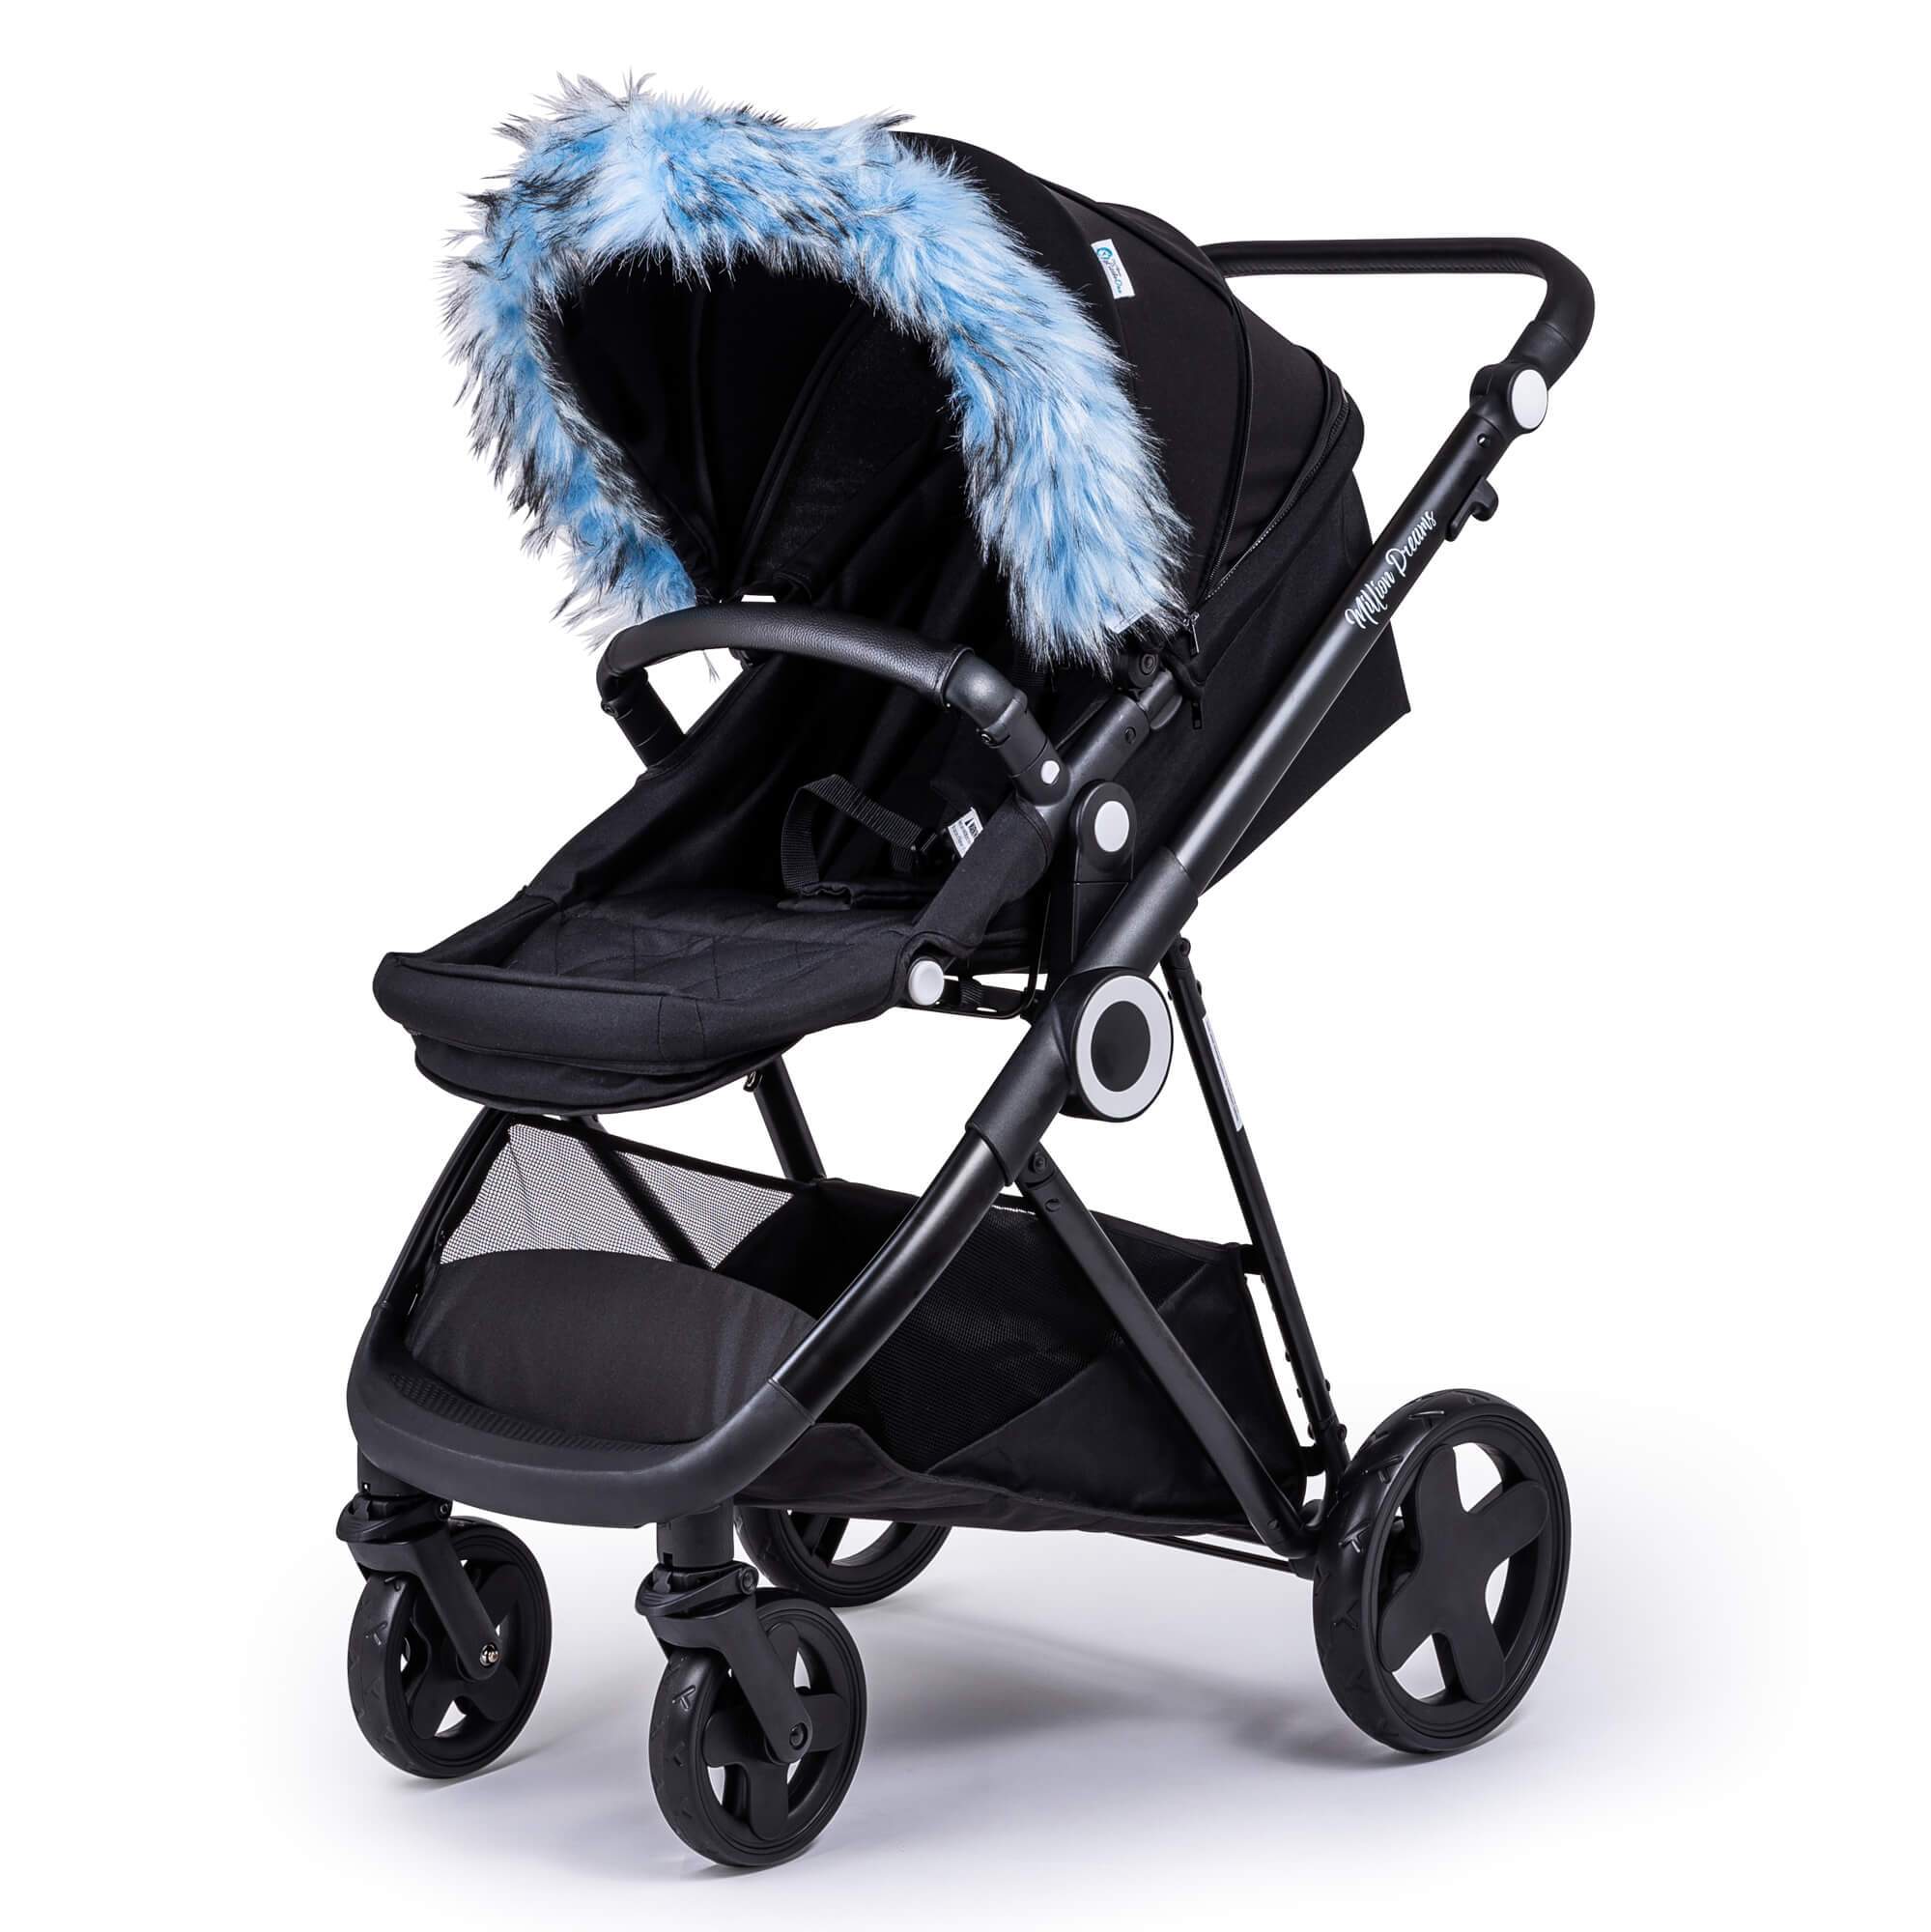 Pram Fur Hood Trim Attachment For Pushchair Compatible with Tutti Bambini - Light Blue / Fits All Models | For Your Little One